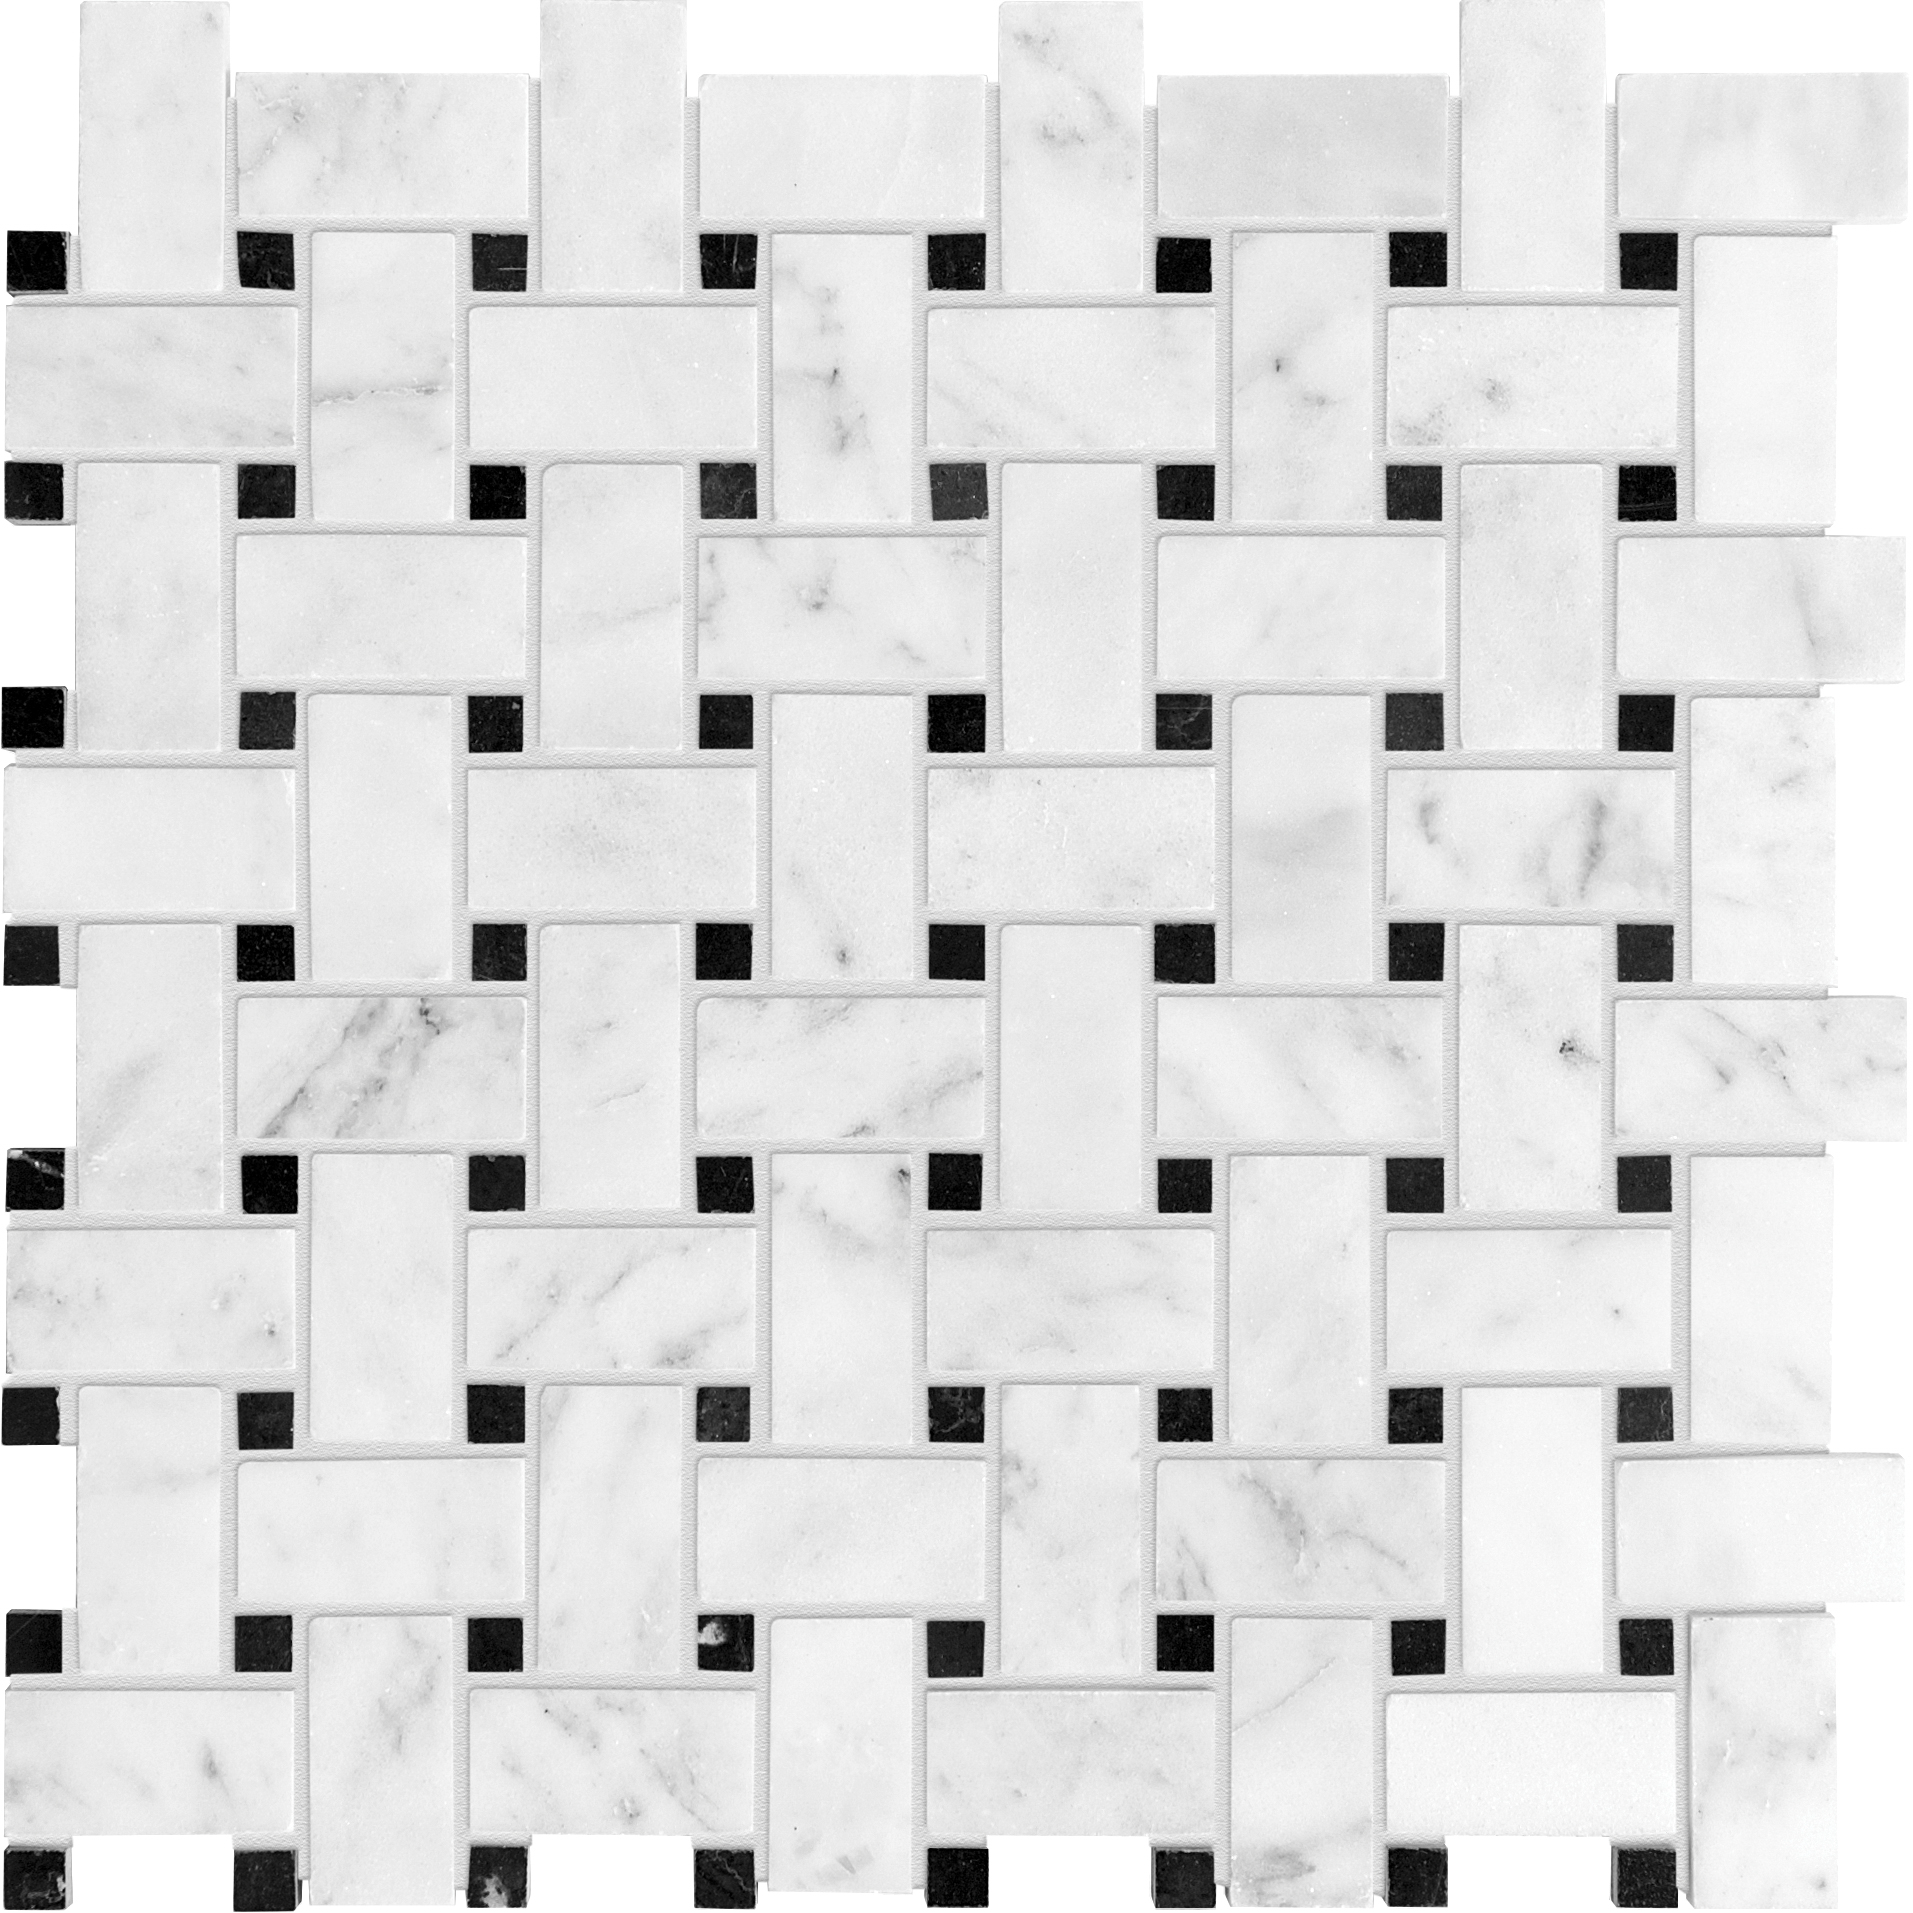 marble basketweave 2x2-inch pattern natural stone mosaic from bianco venatino anatolia collection distributed by surface group international honed finish straight edge edge mesh shape